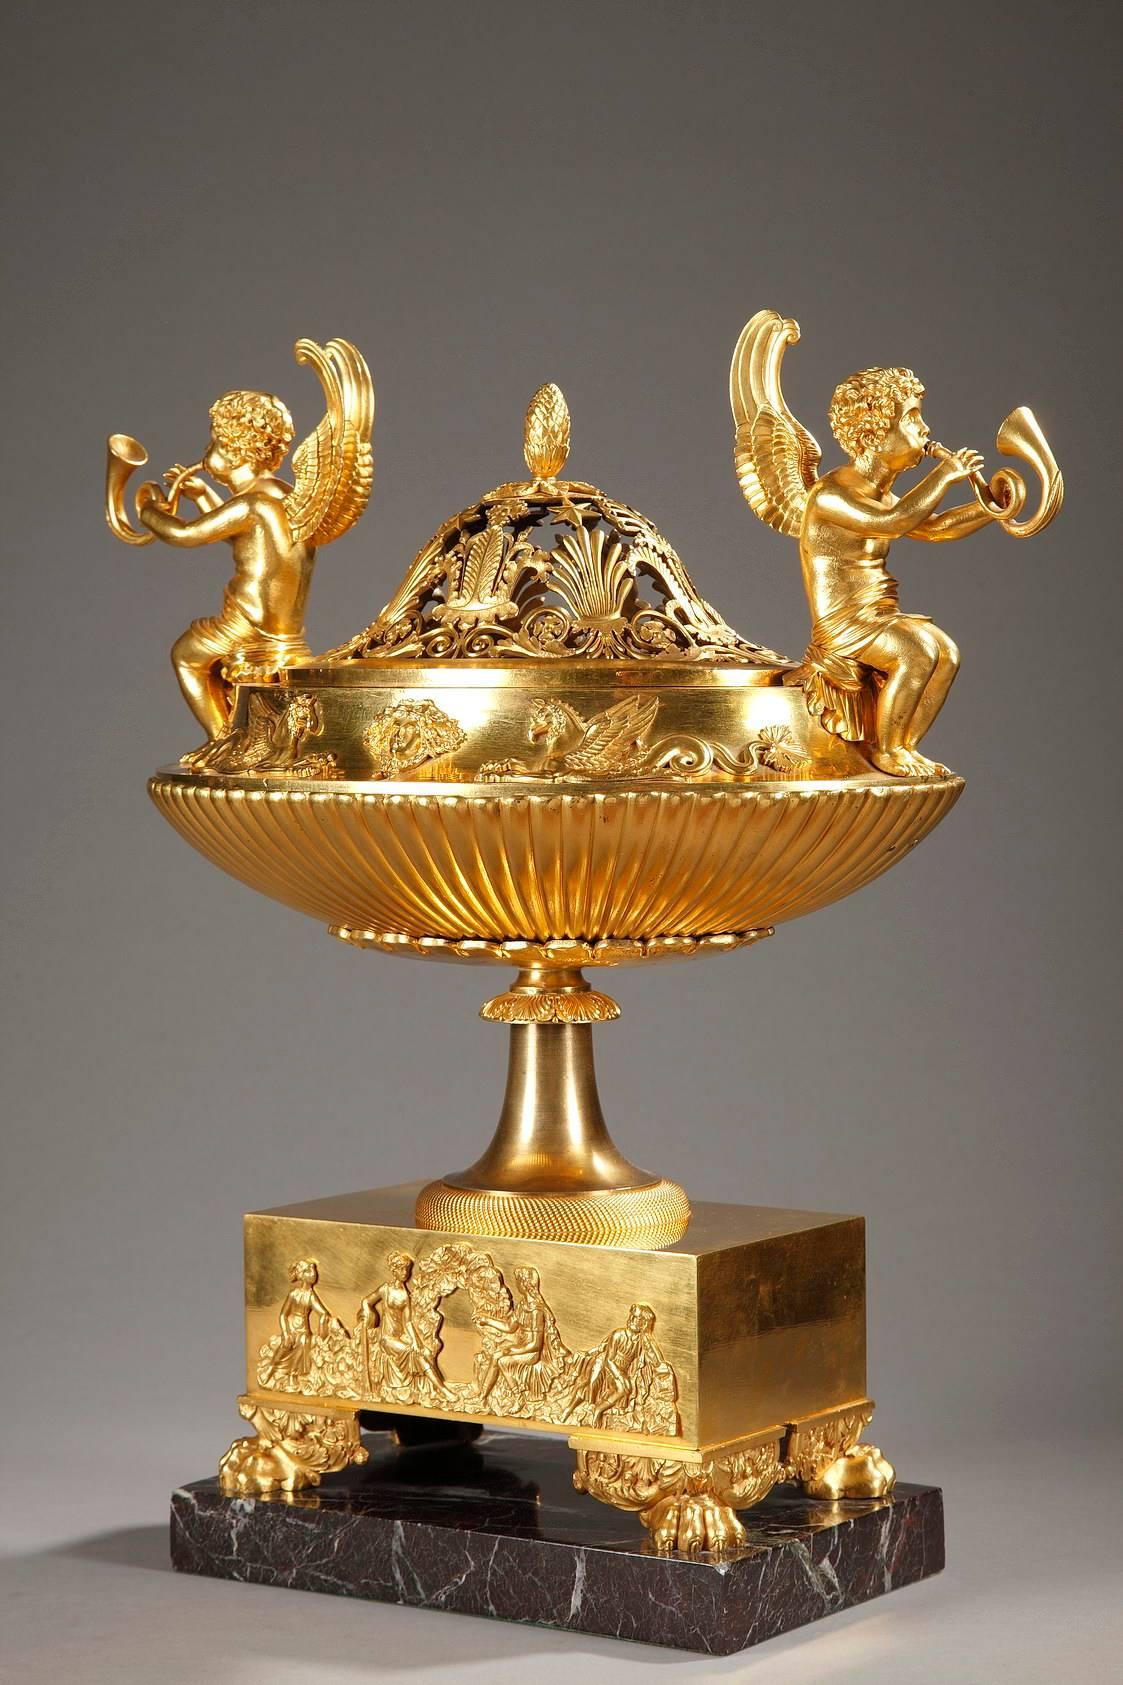 Ormolu perfume burner or potpourri holder that serves as a striking table centerpiece. The openwork lid is adorned with palmettes, foliage, small flowers, and stars. Two winged Hermes playing trumpets sit on the perfume dish and form the handles.